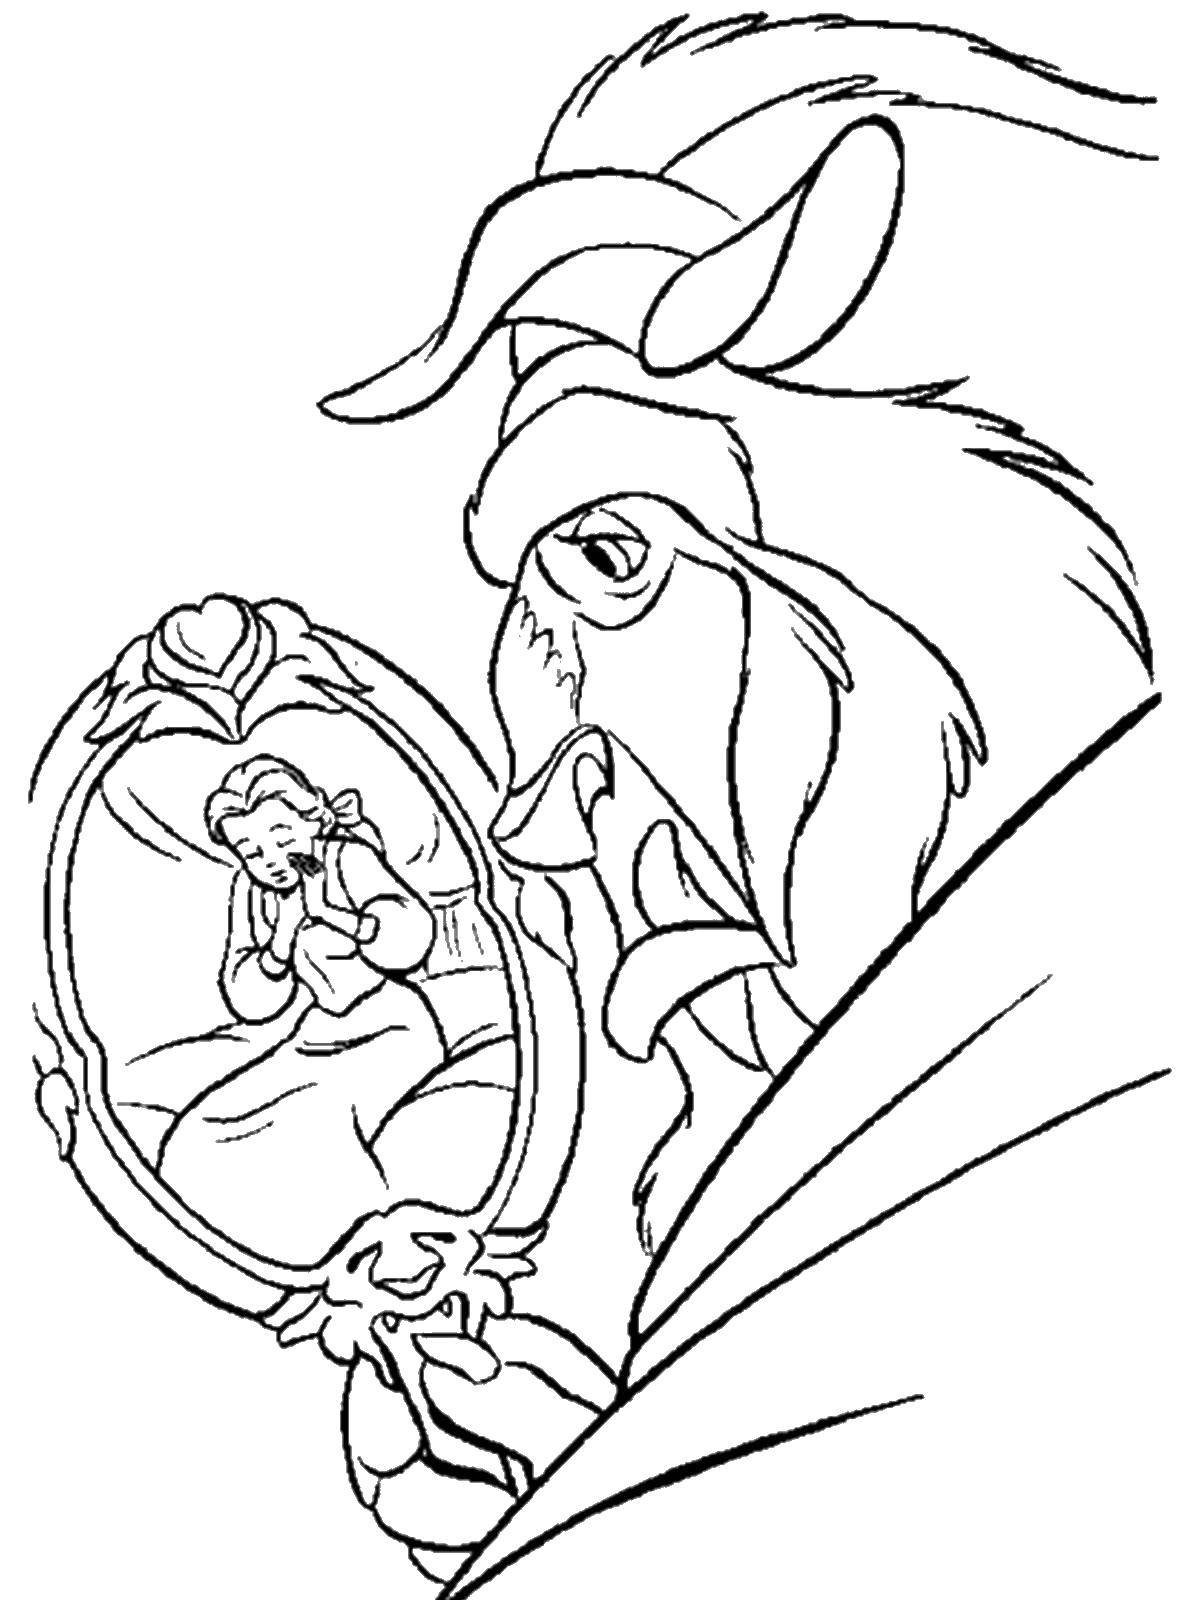 Coloring Beauty Belle and the beast. Category beauty and the beast. Tags:  beautiful , monster.